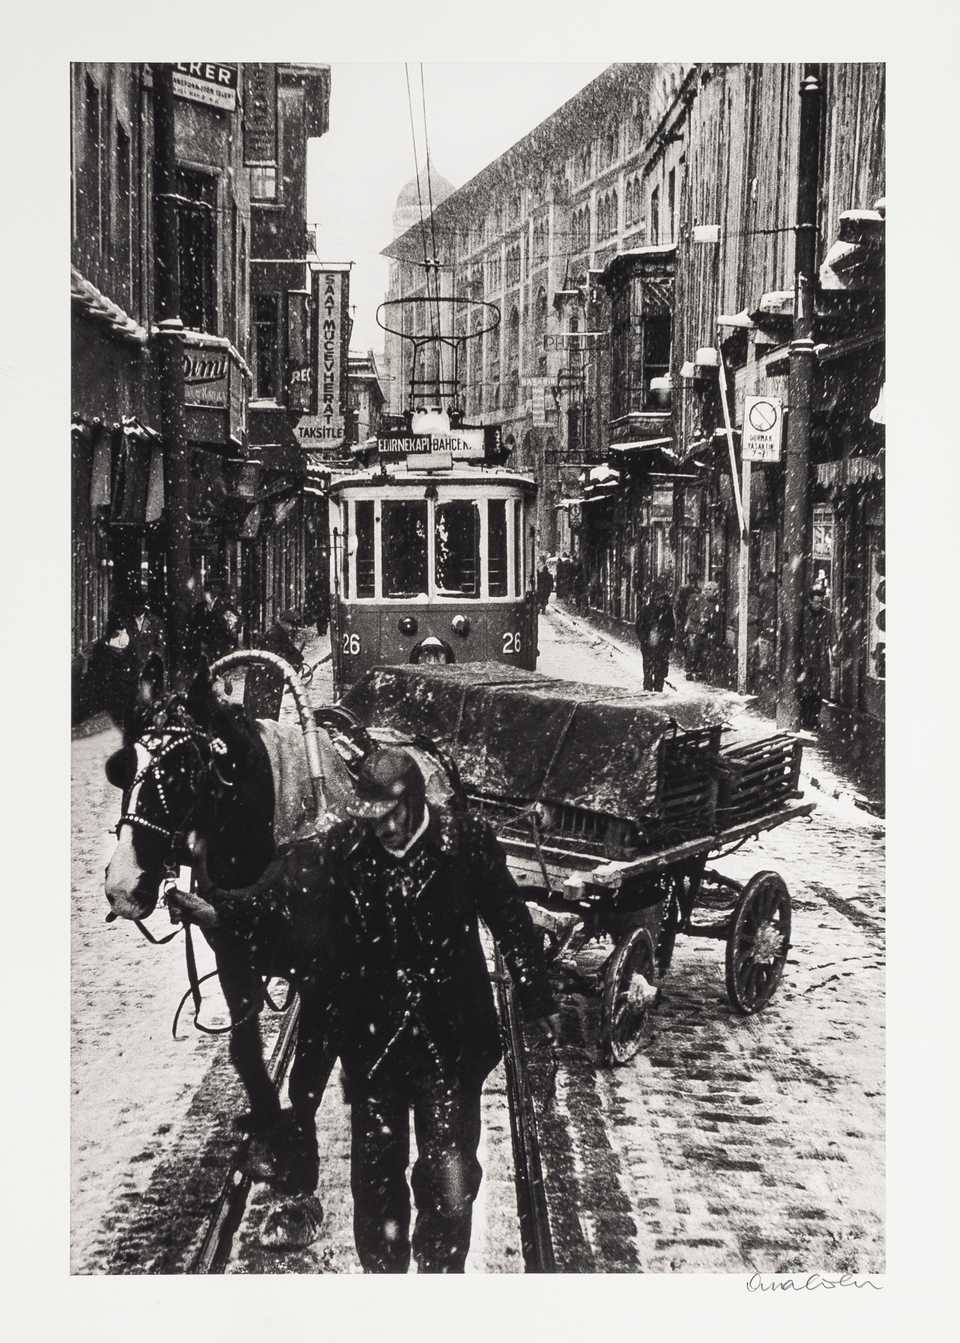 Ara Guler named “A horse carriage and a tram in Sirkeci on a winter’s day”, from 1956, his favourite.